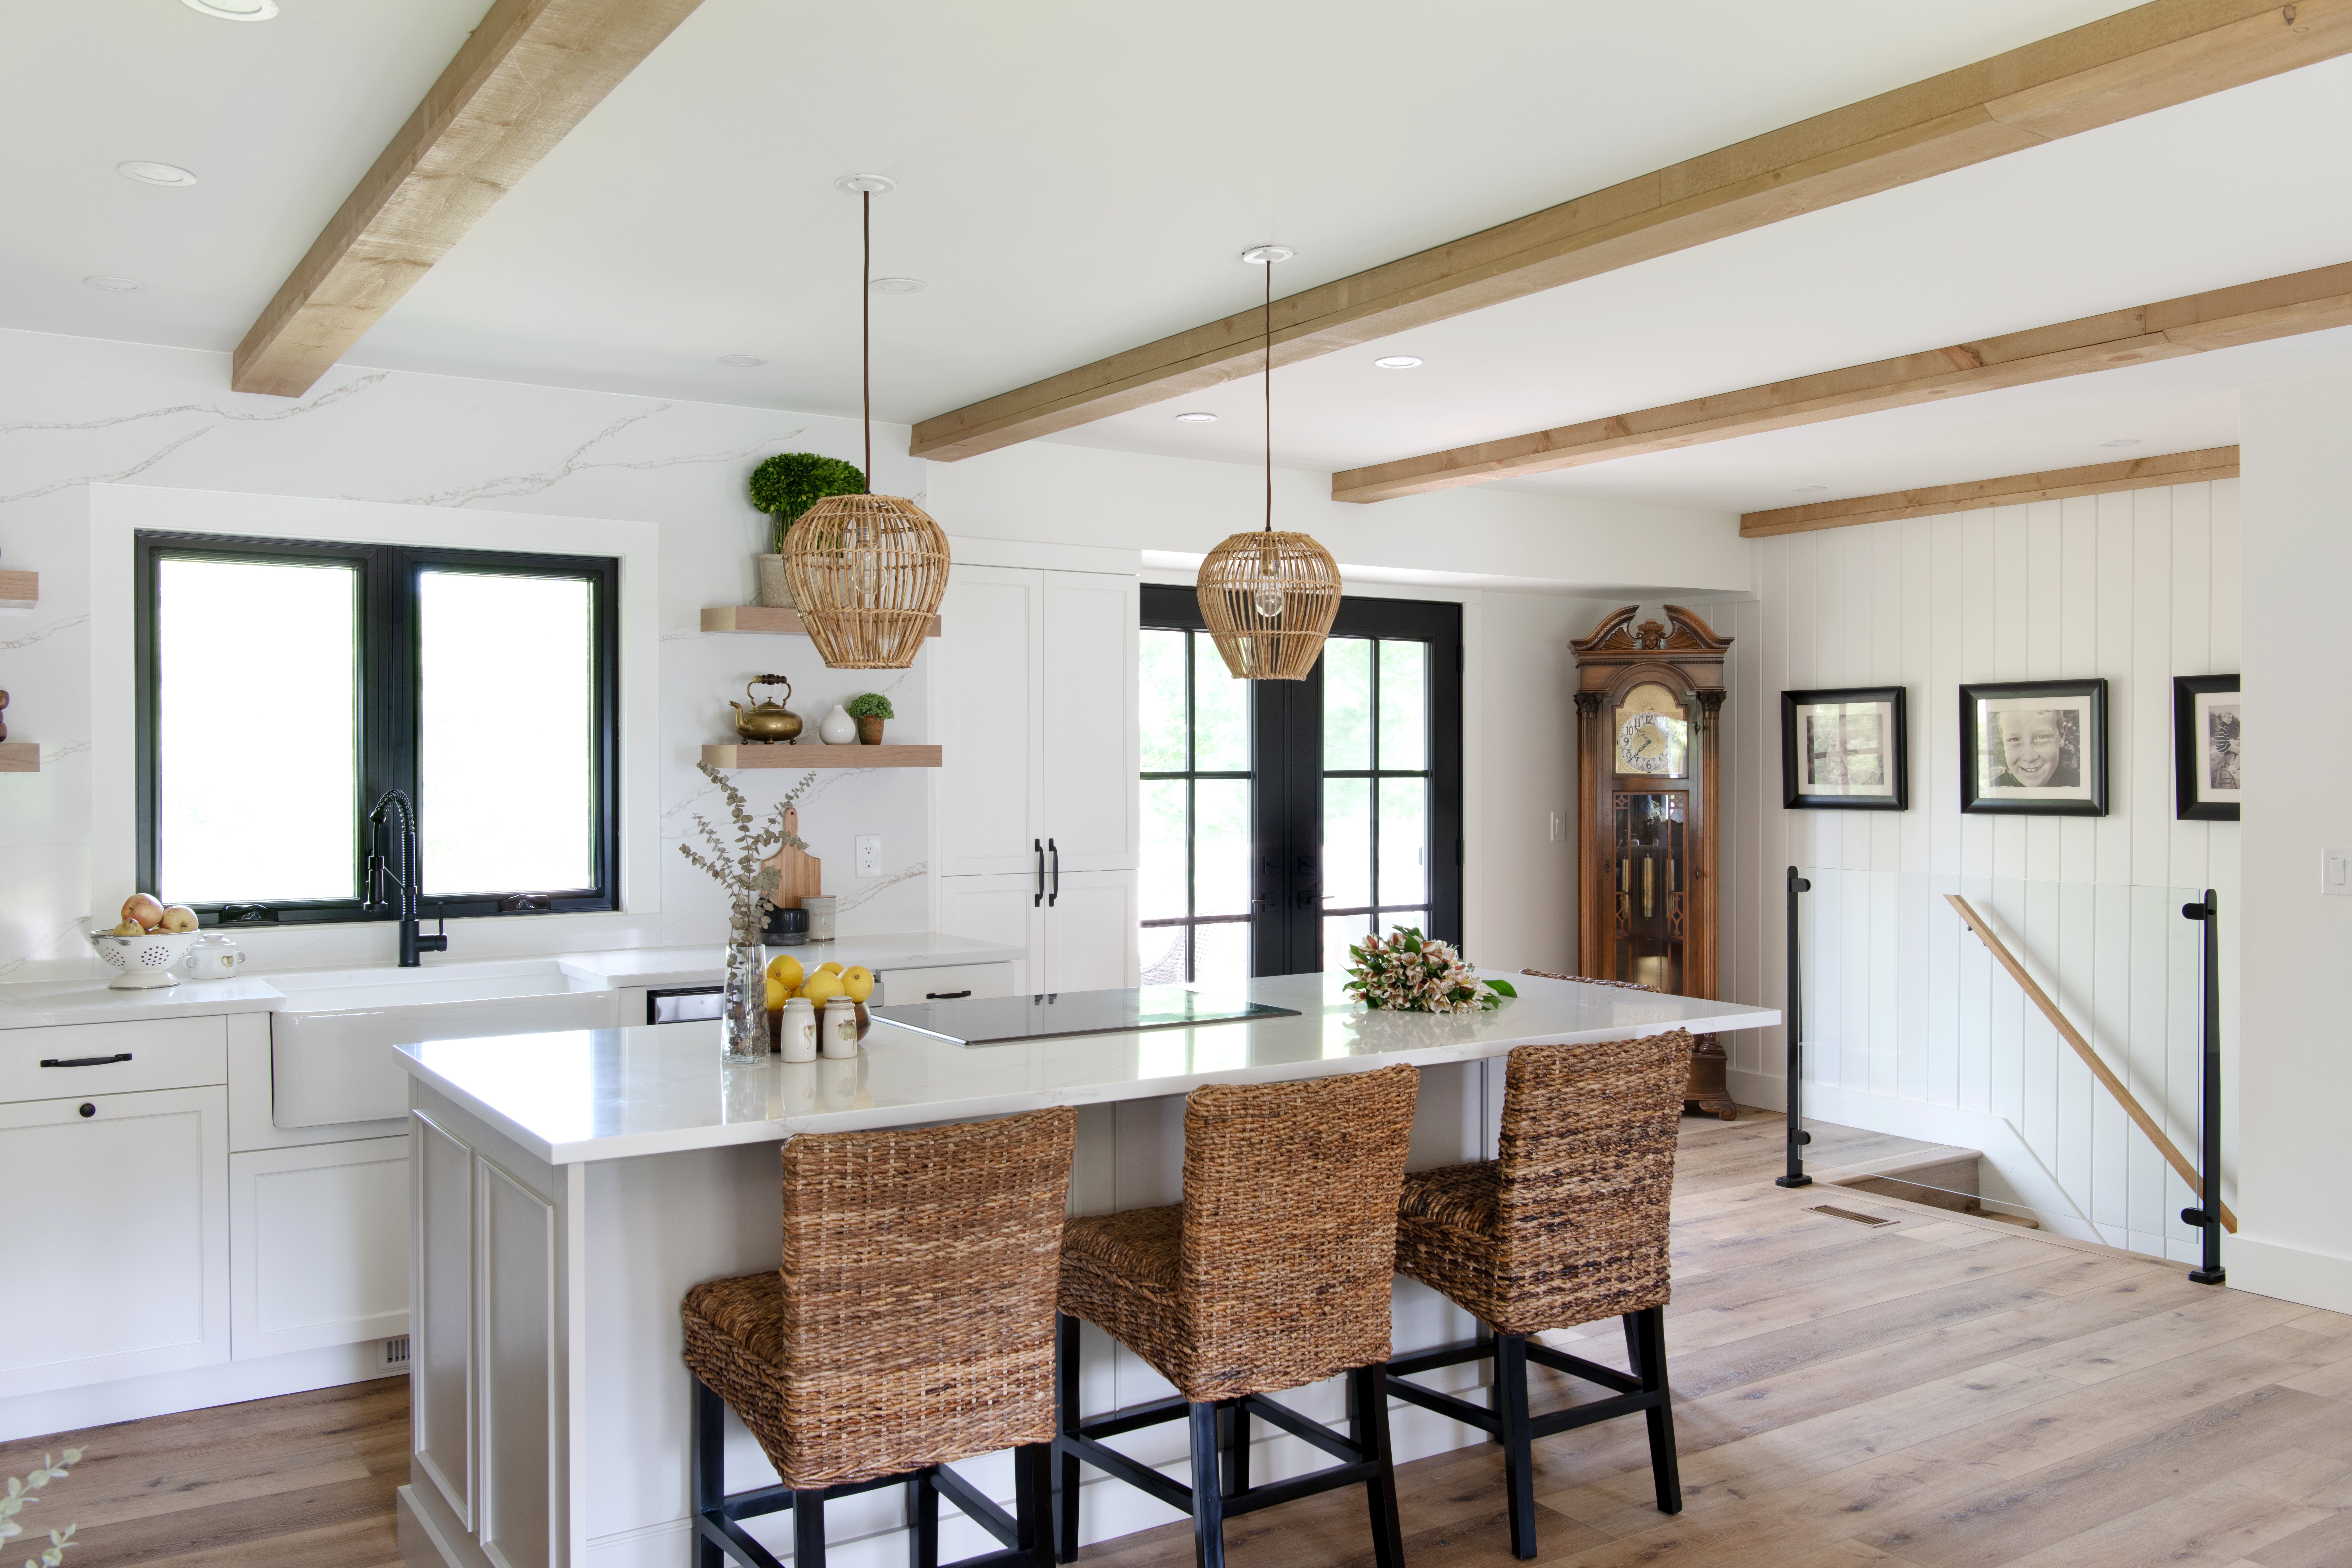 A modern-farmhouse design with wood and burlap accents.